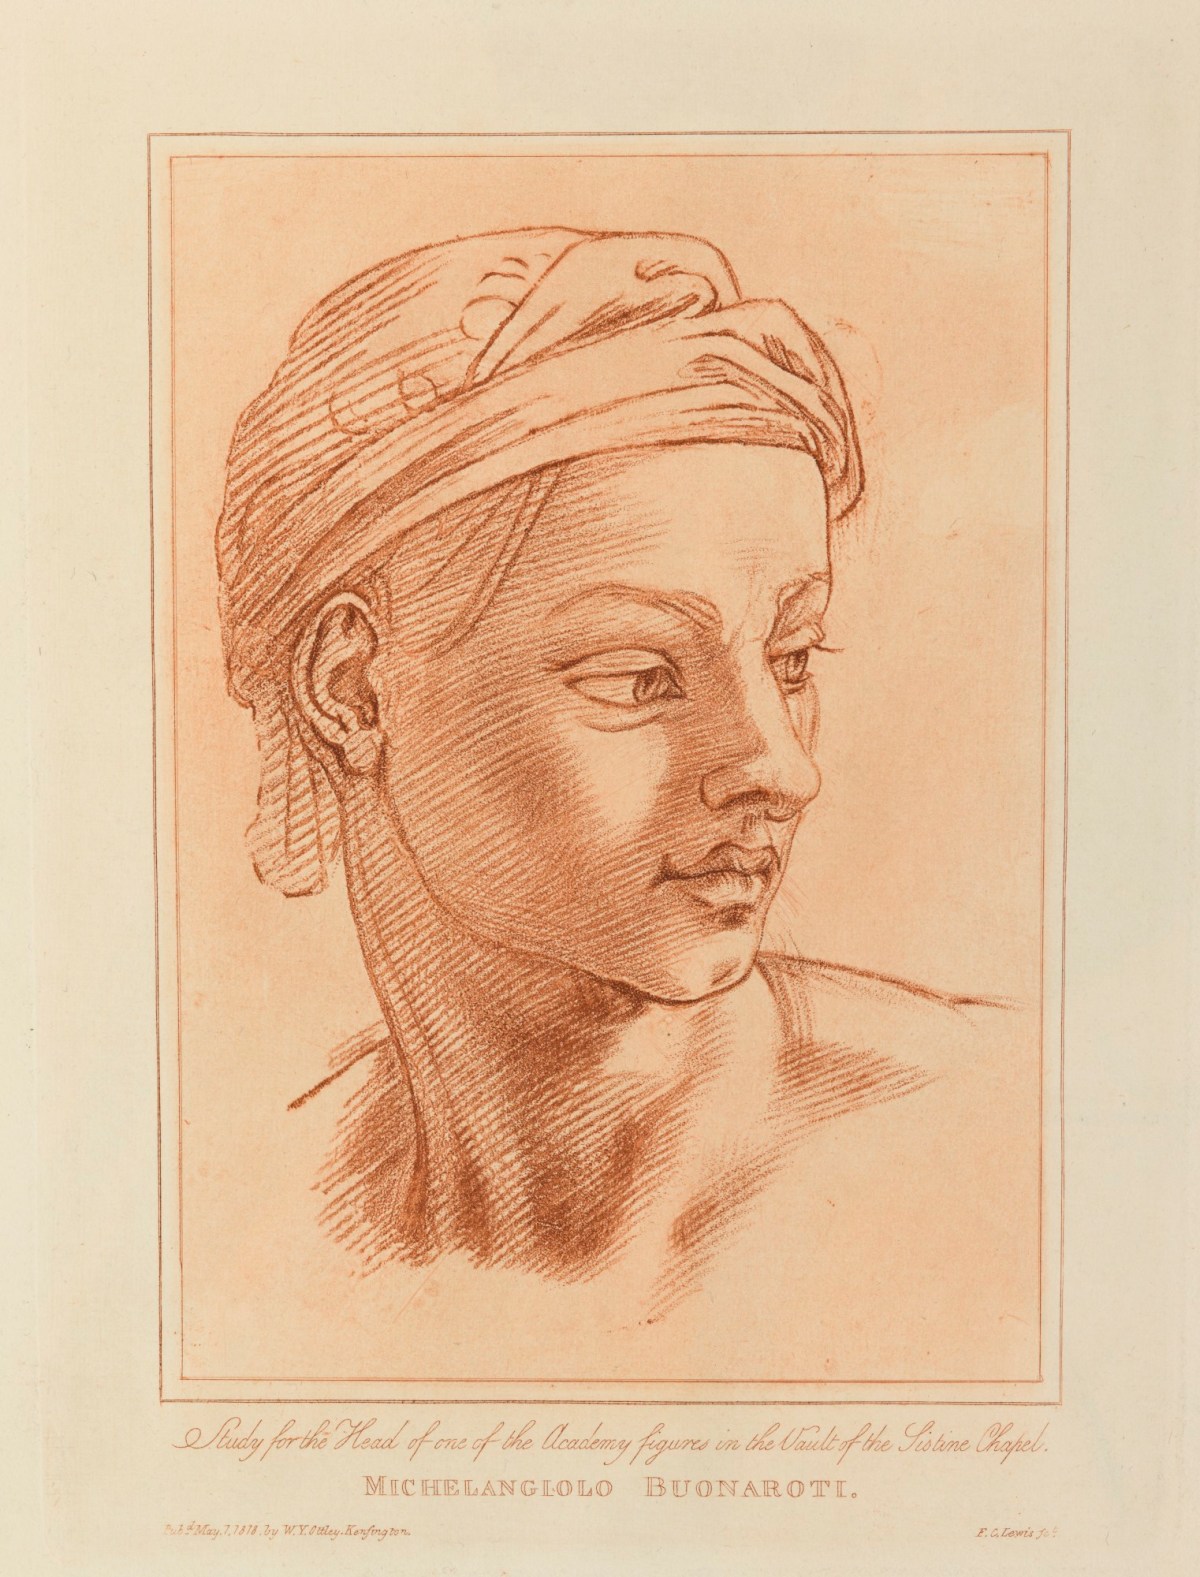 Michelangelo Buonarroti  Master Drawings from the Cleveland Museum of Art   The Morgan Library  Museum